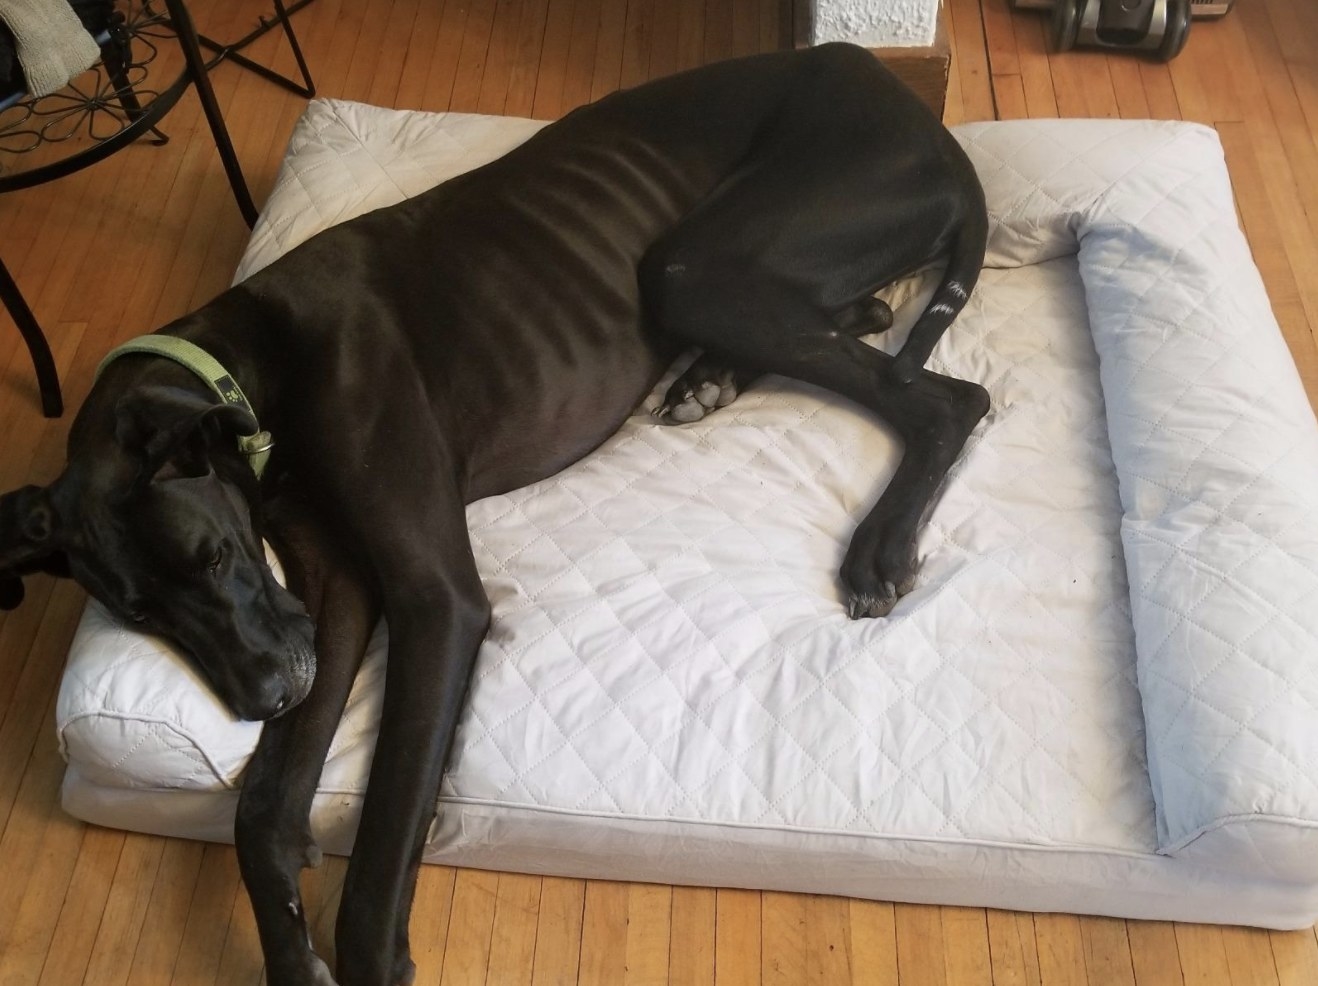 A dog on a dog bed